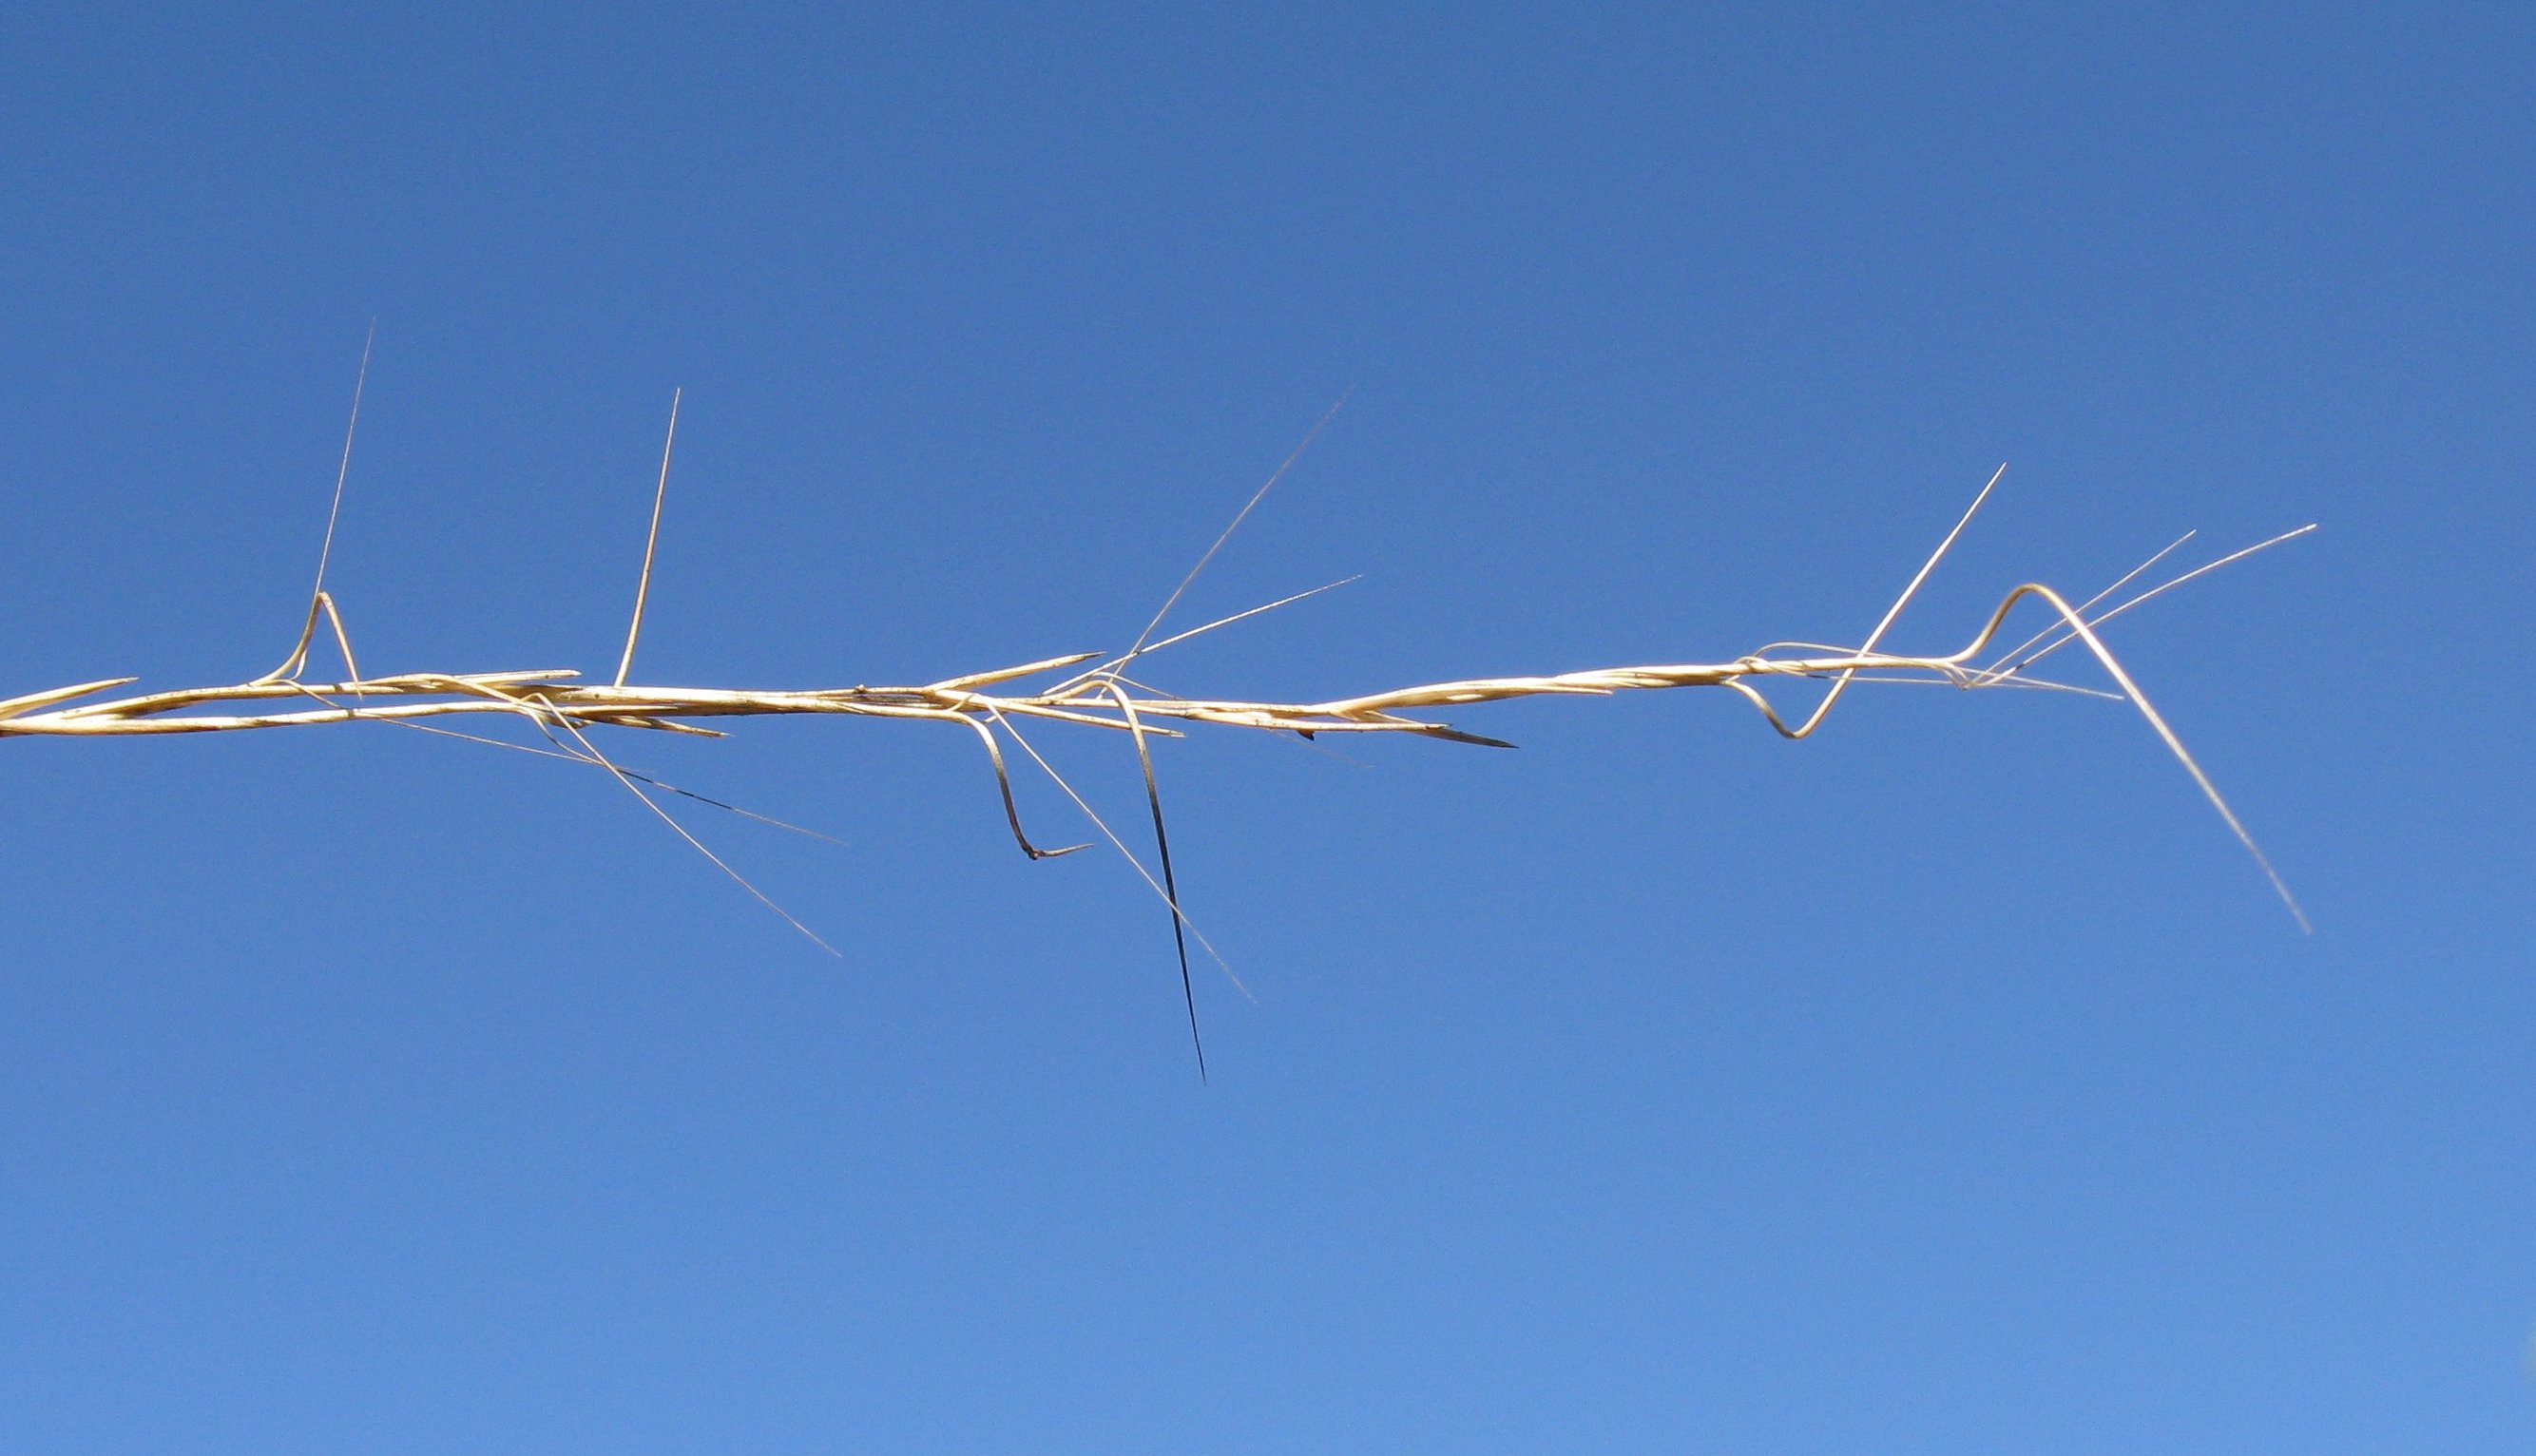 Fig. 6. Inflorescence or flowering head of Aristida warburgii (PHOTO: Harry Rose from South West Rocks, Australia [CC BY 2.0 (https://creativecommons. org/licenses/by/2.0)]).